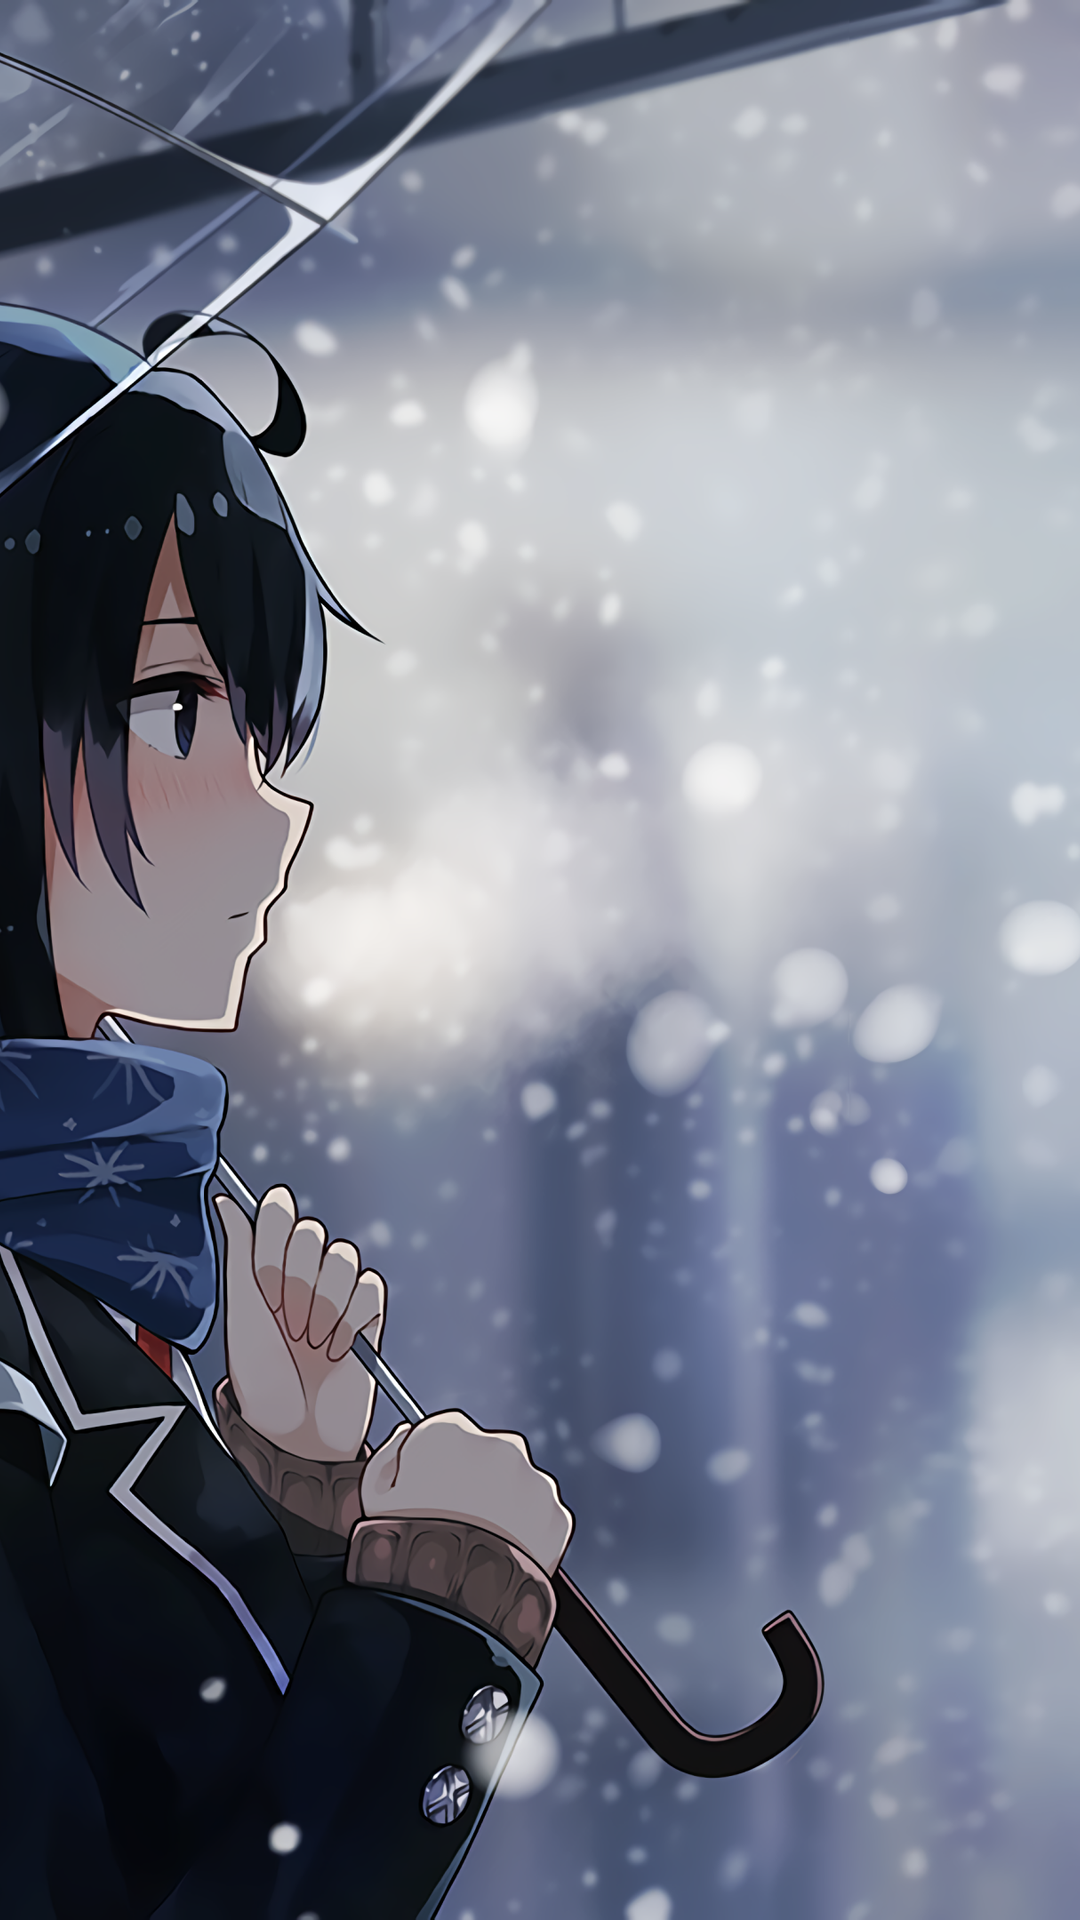 10 Anime Snow Wallpapers for iPhone and Android by Ralph Parks